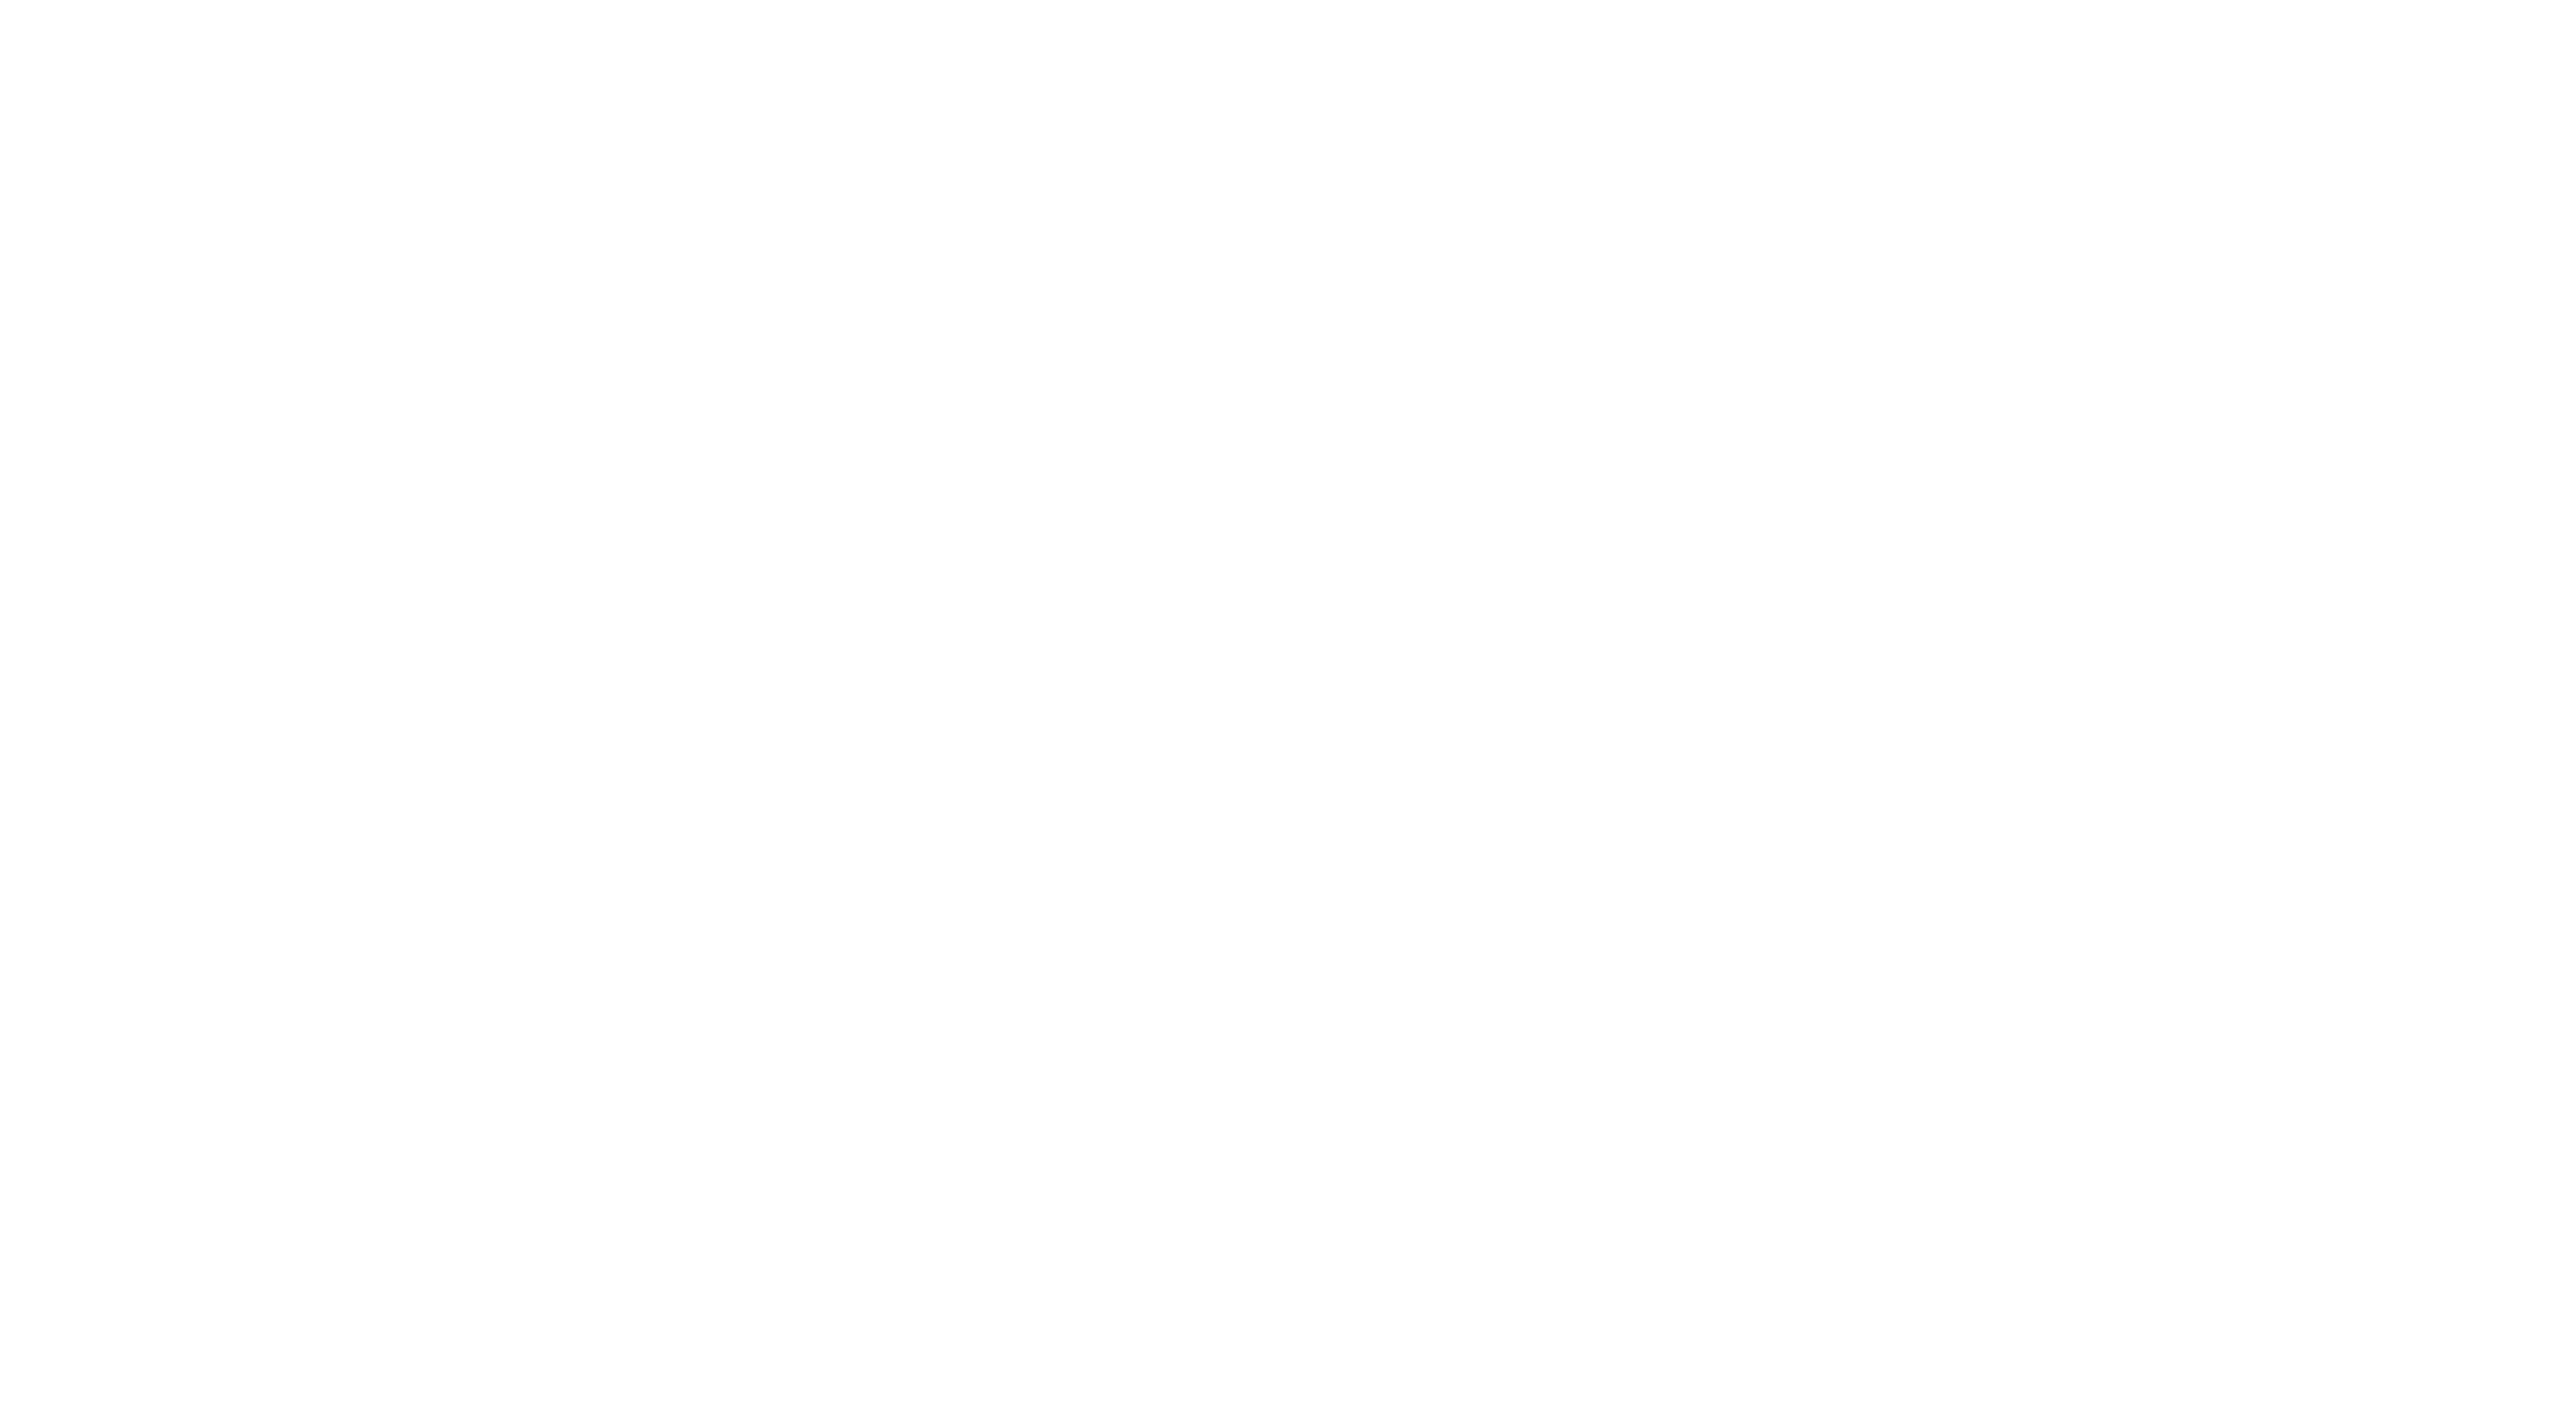 Illustration of three devices - laptop, tablet, and mobile as storefronts. The laptop has the Shopify themes logo in the middle and has an accessibility sign hanging to the left of it.